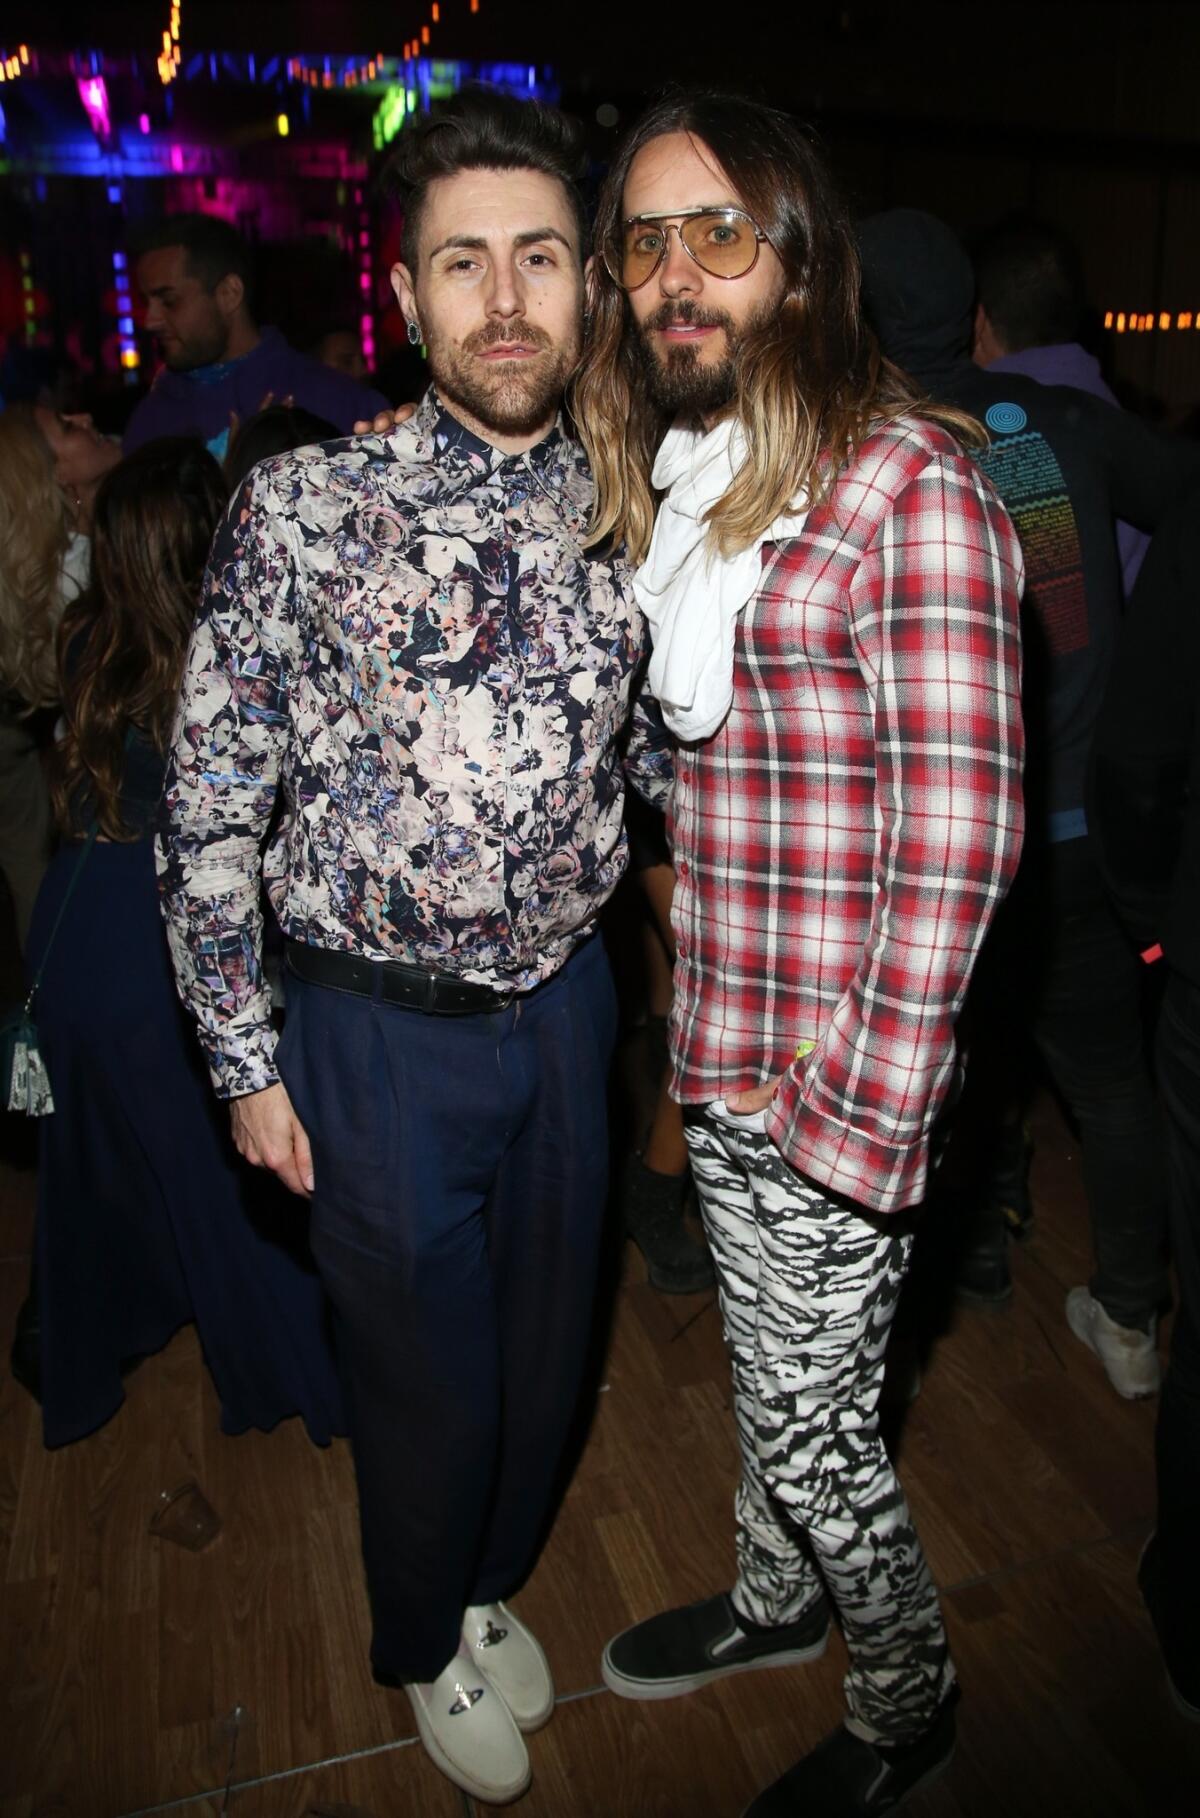 Jared Leto, right, and a guest attend Neon Carnival in Thermal, Calif., on Saturday night.